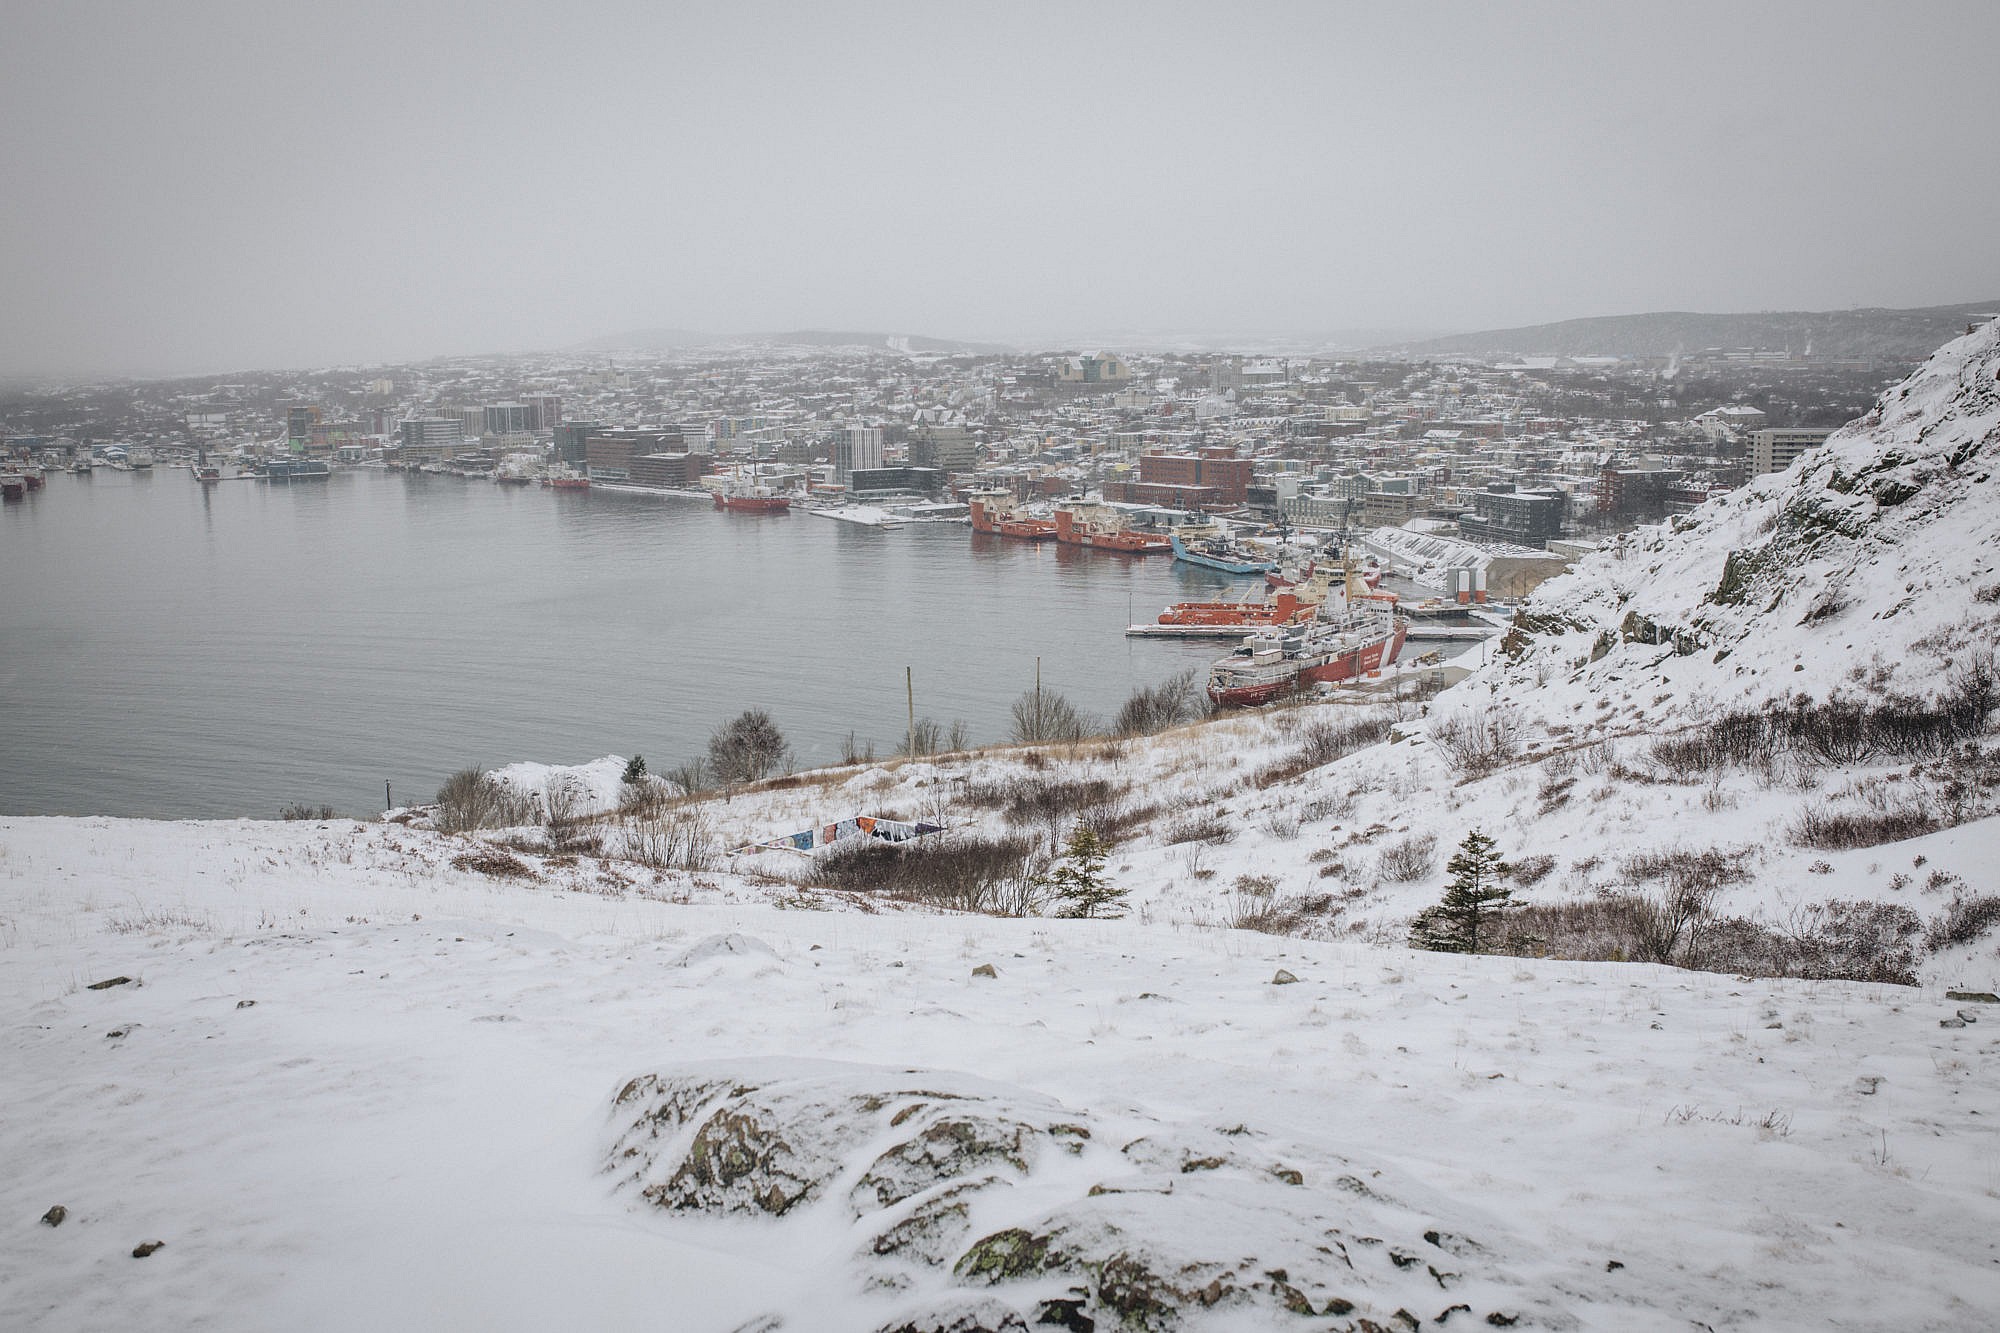 St. John’s Harbour is the primary hub for Newfoundland’s offshore oil industry (Photography by Adam Hefferman)